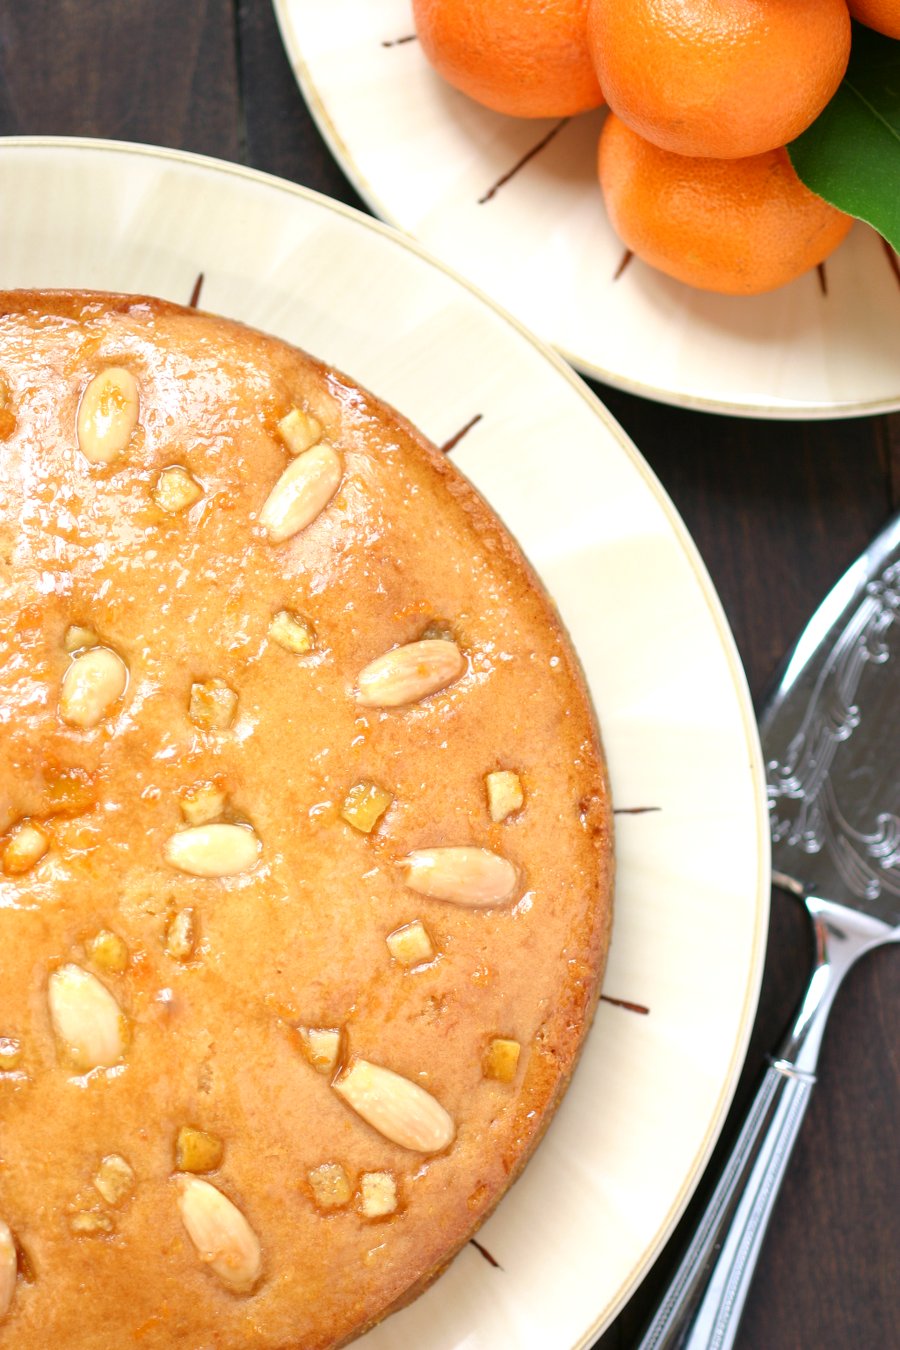 Sweet oranges and fruity olive oil lend a fragrant aroma and a moist crumb to this Italian-inspired recipe for Orange Almond Olive Oil cake.